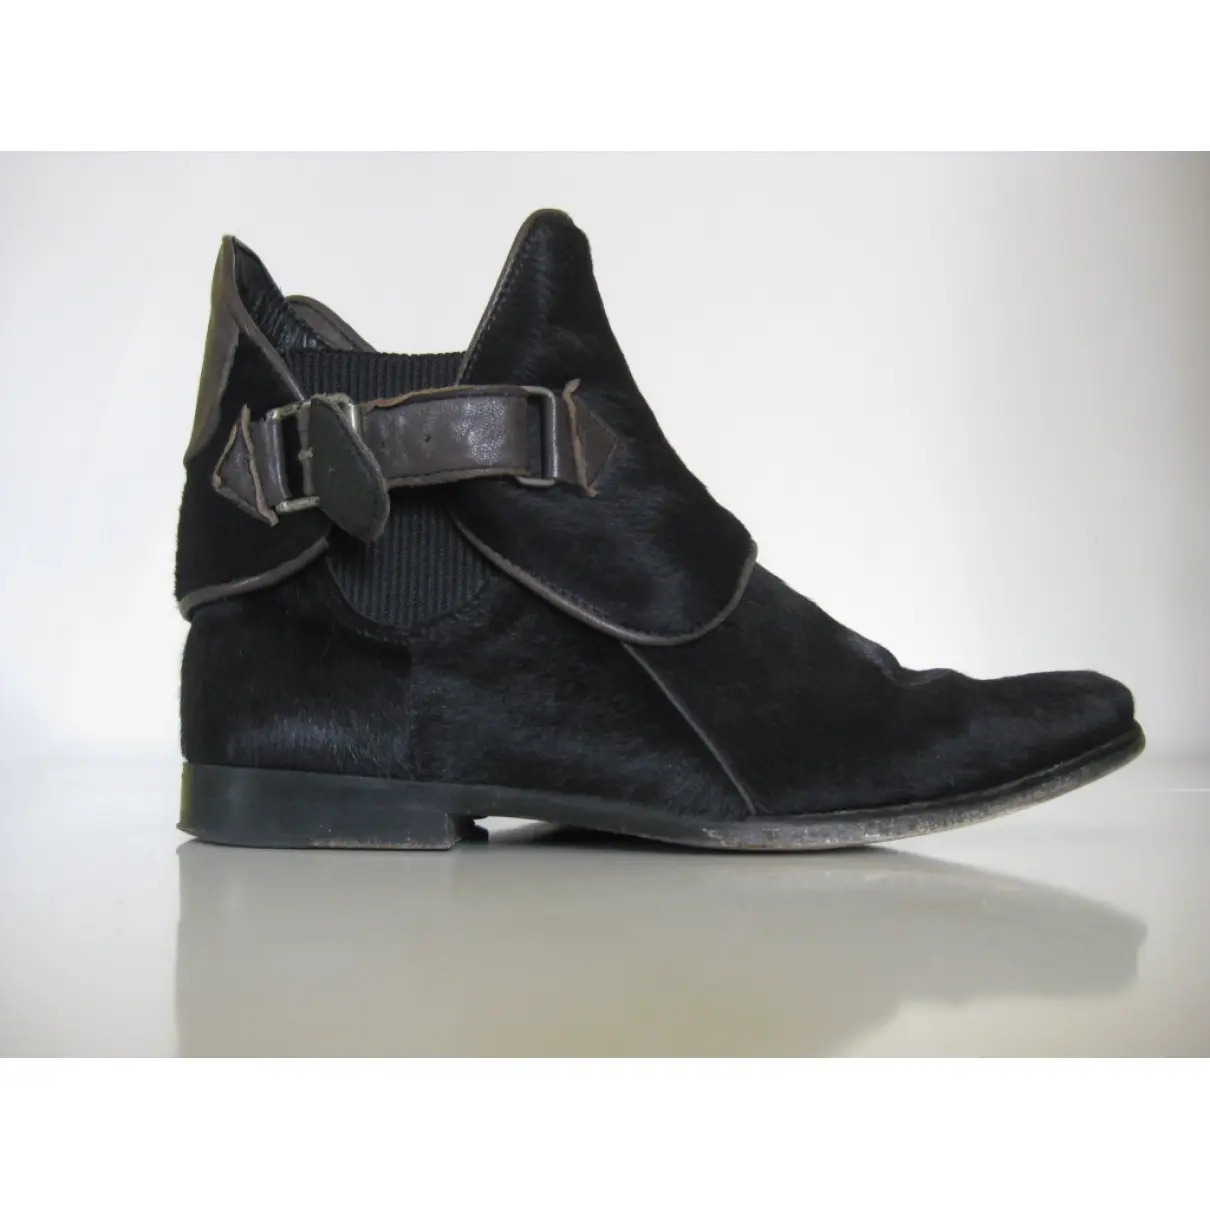 Heimstone Pony-style calfskin buckled boots for sale